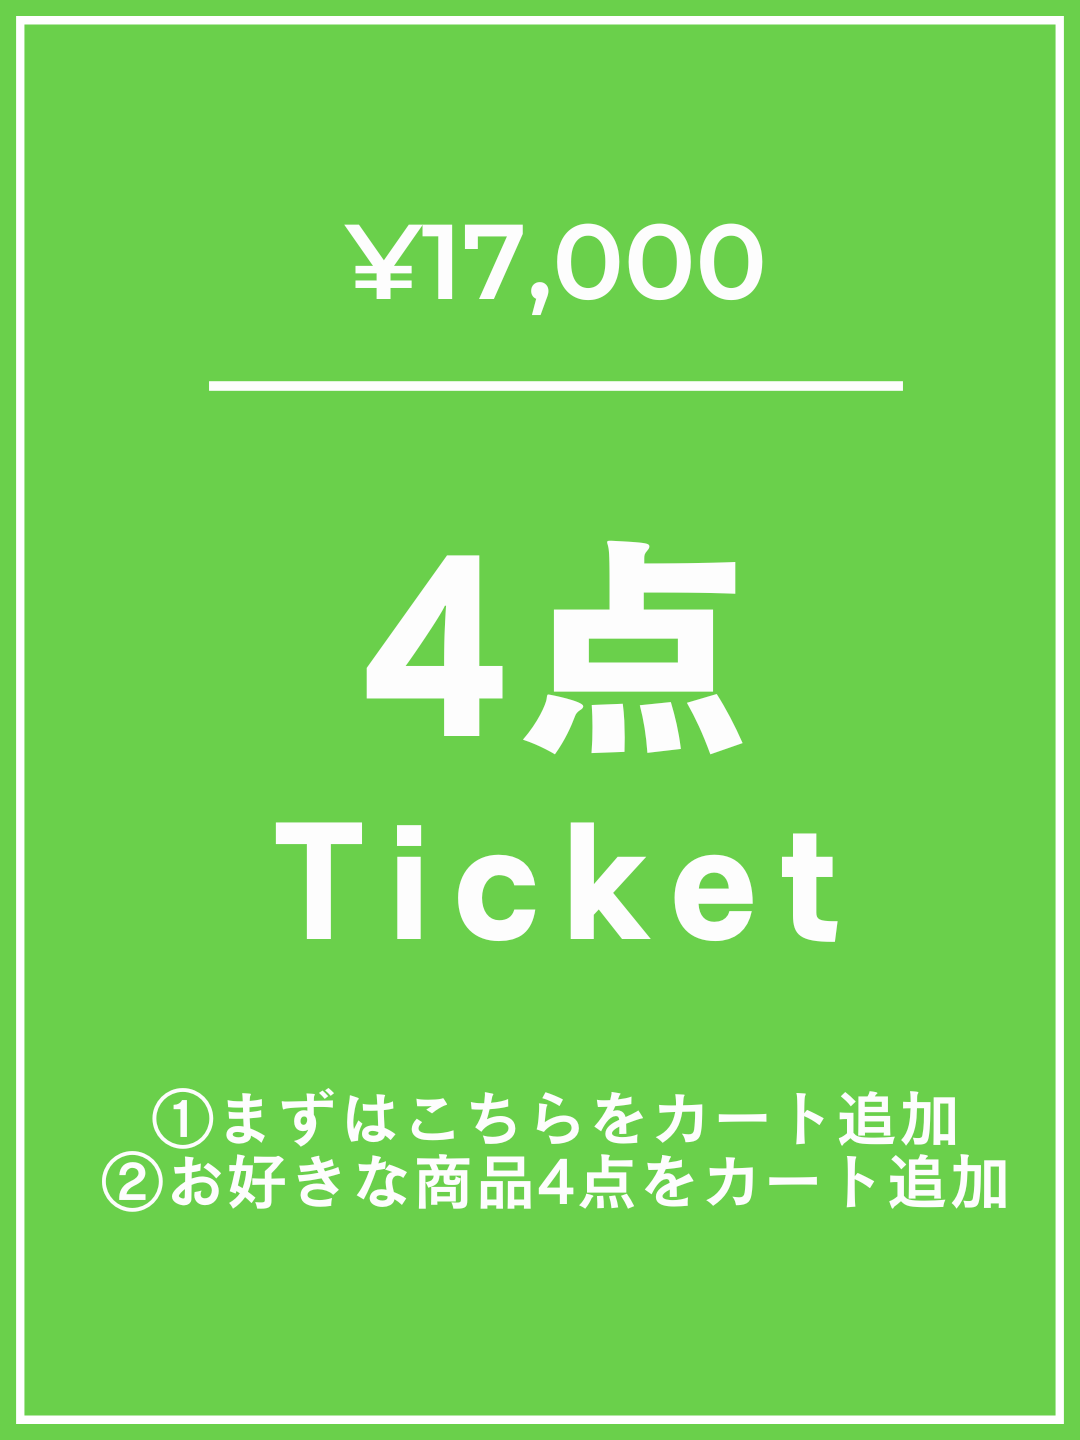 [Add this to your cart first] ¥17,000 ticket 